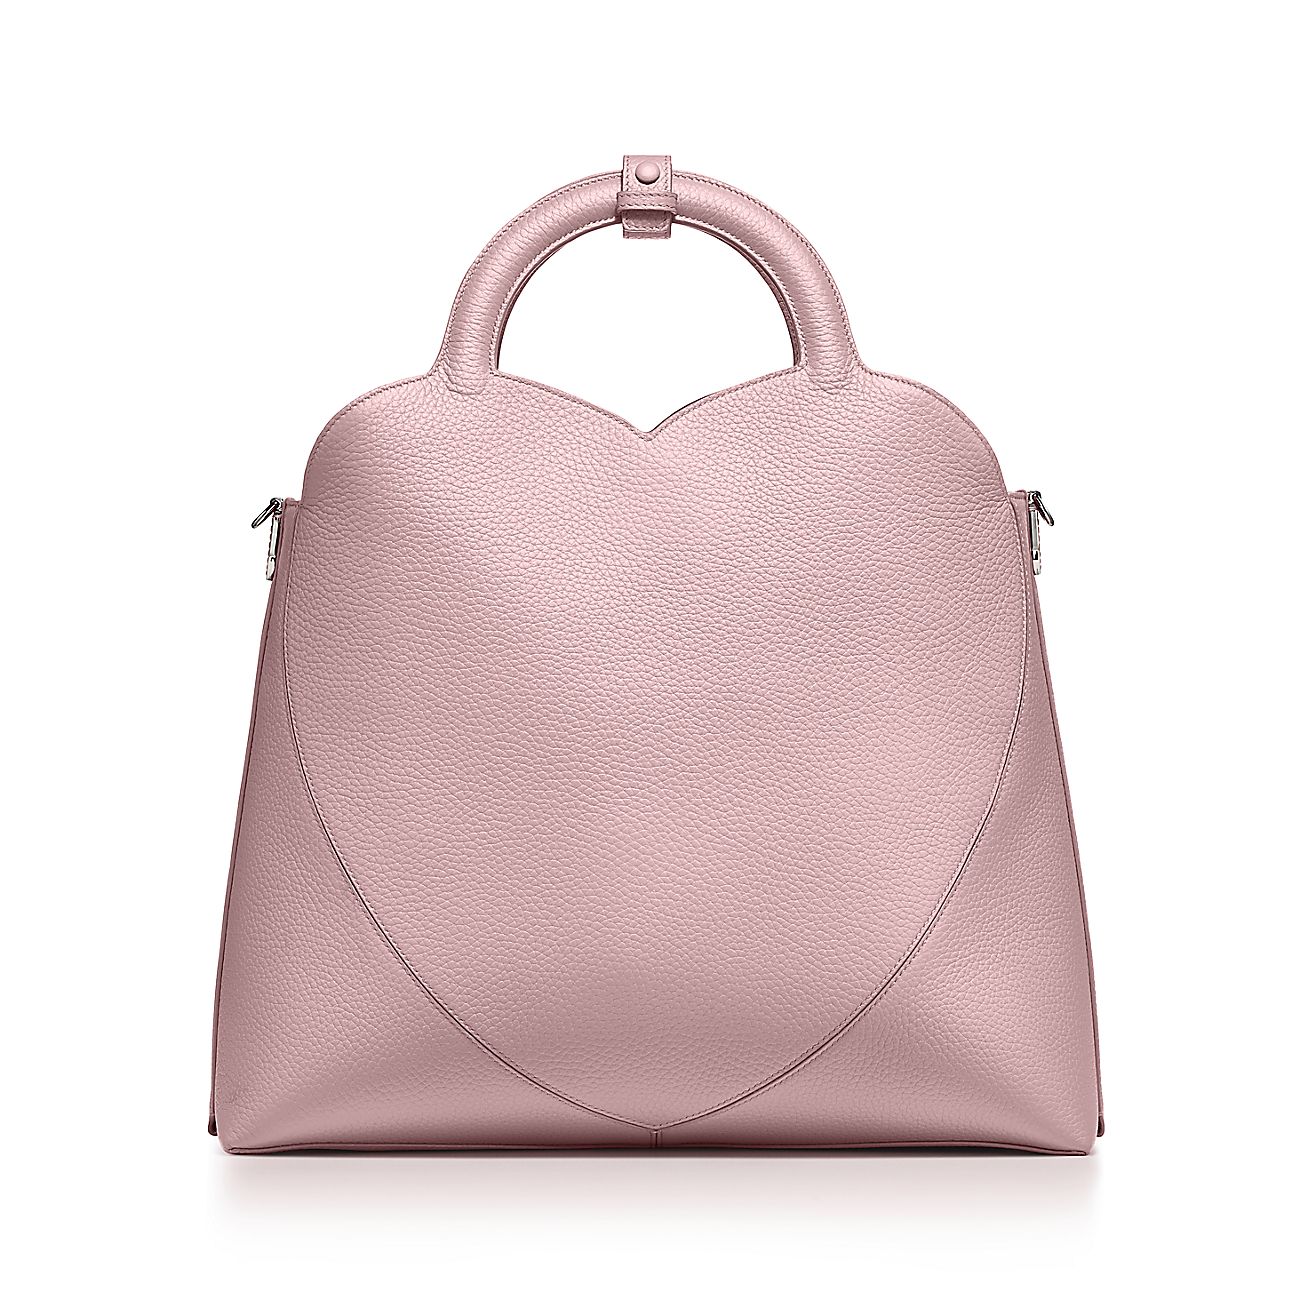 Return to Tiffany® Medium Tote Bag in Crystal Pink Leather